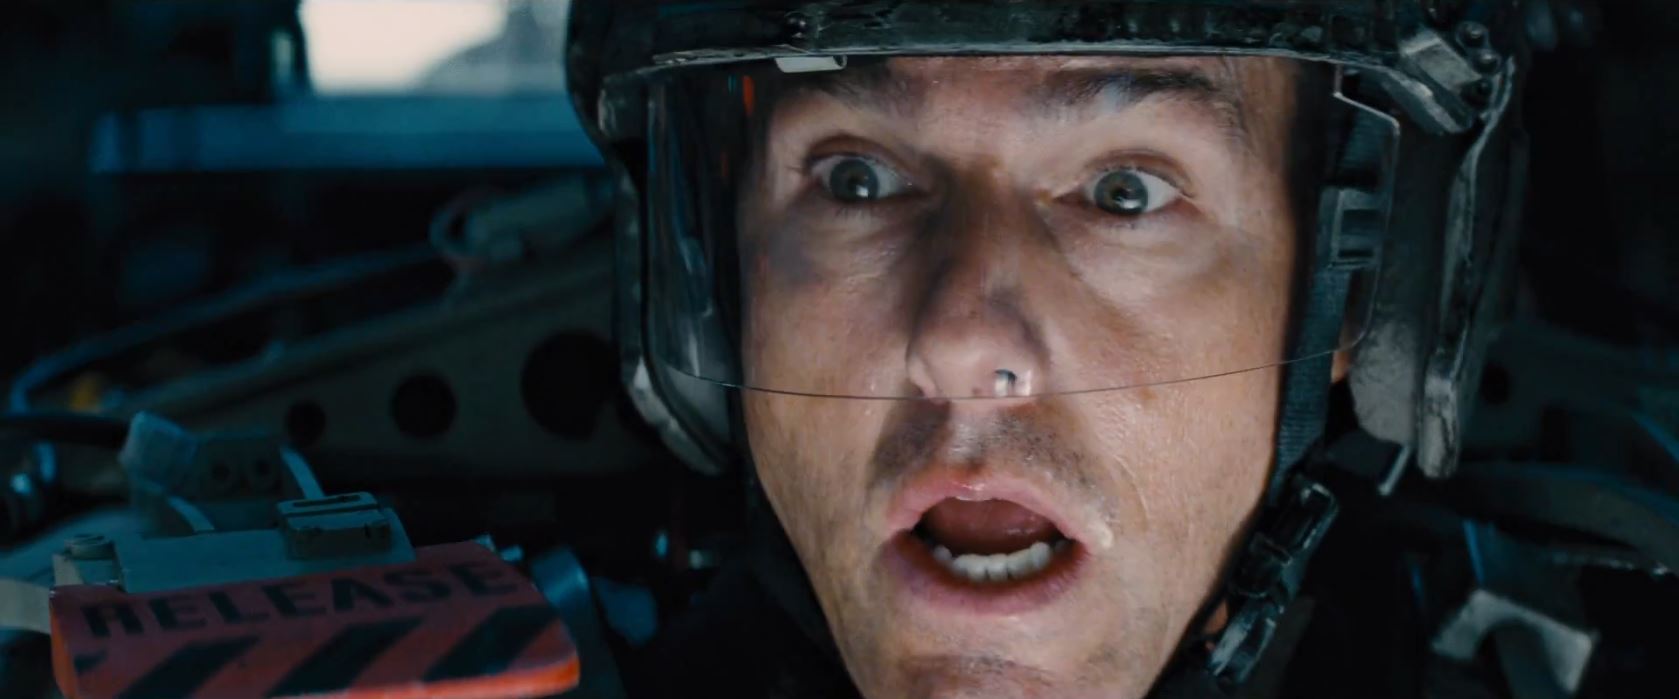 Edge of Tomorrow - Tom Cruise as Lt. Col. Cage